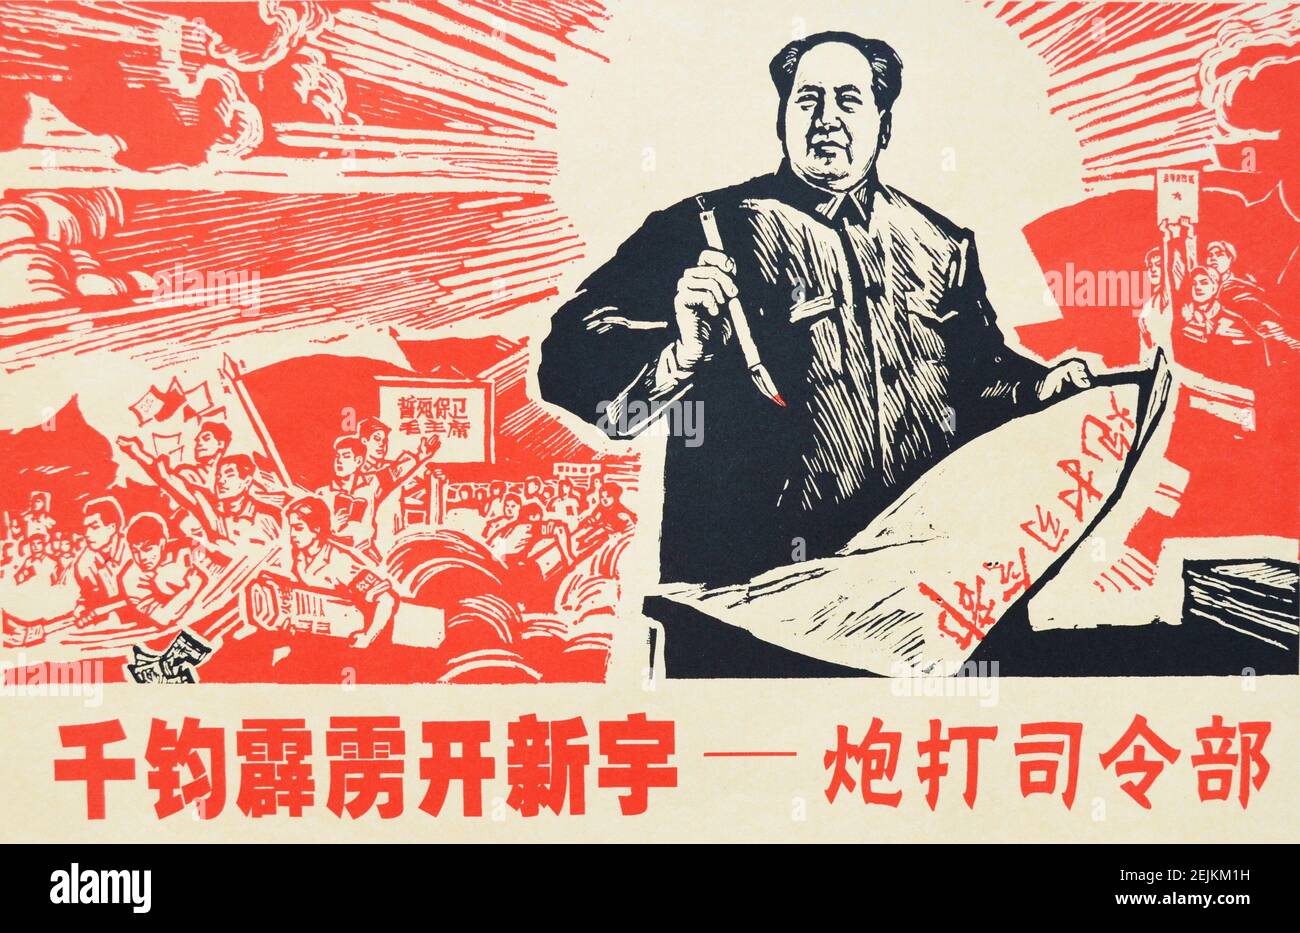 Vintage Chinese propaganda poster with Chairman Mao Zedong. Stock Photo